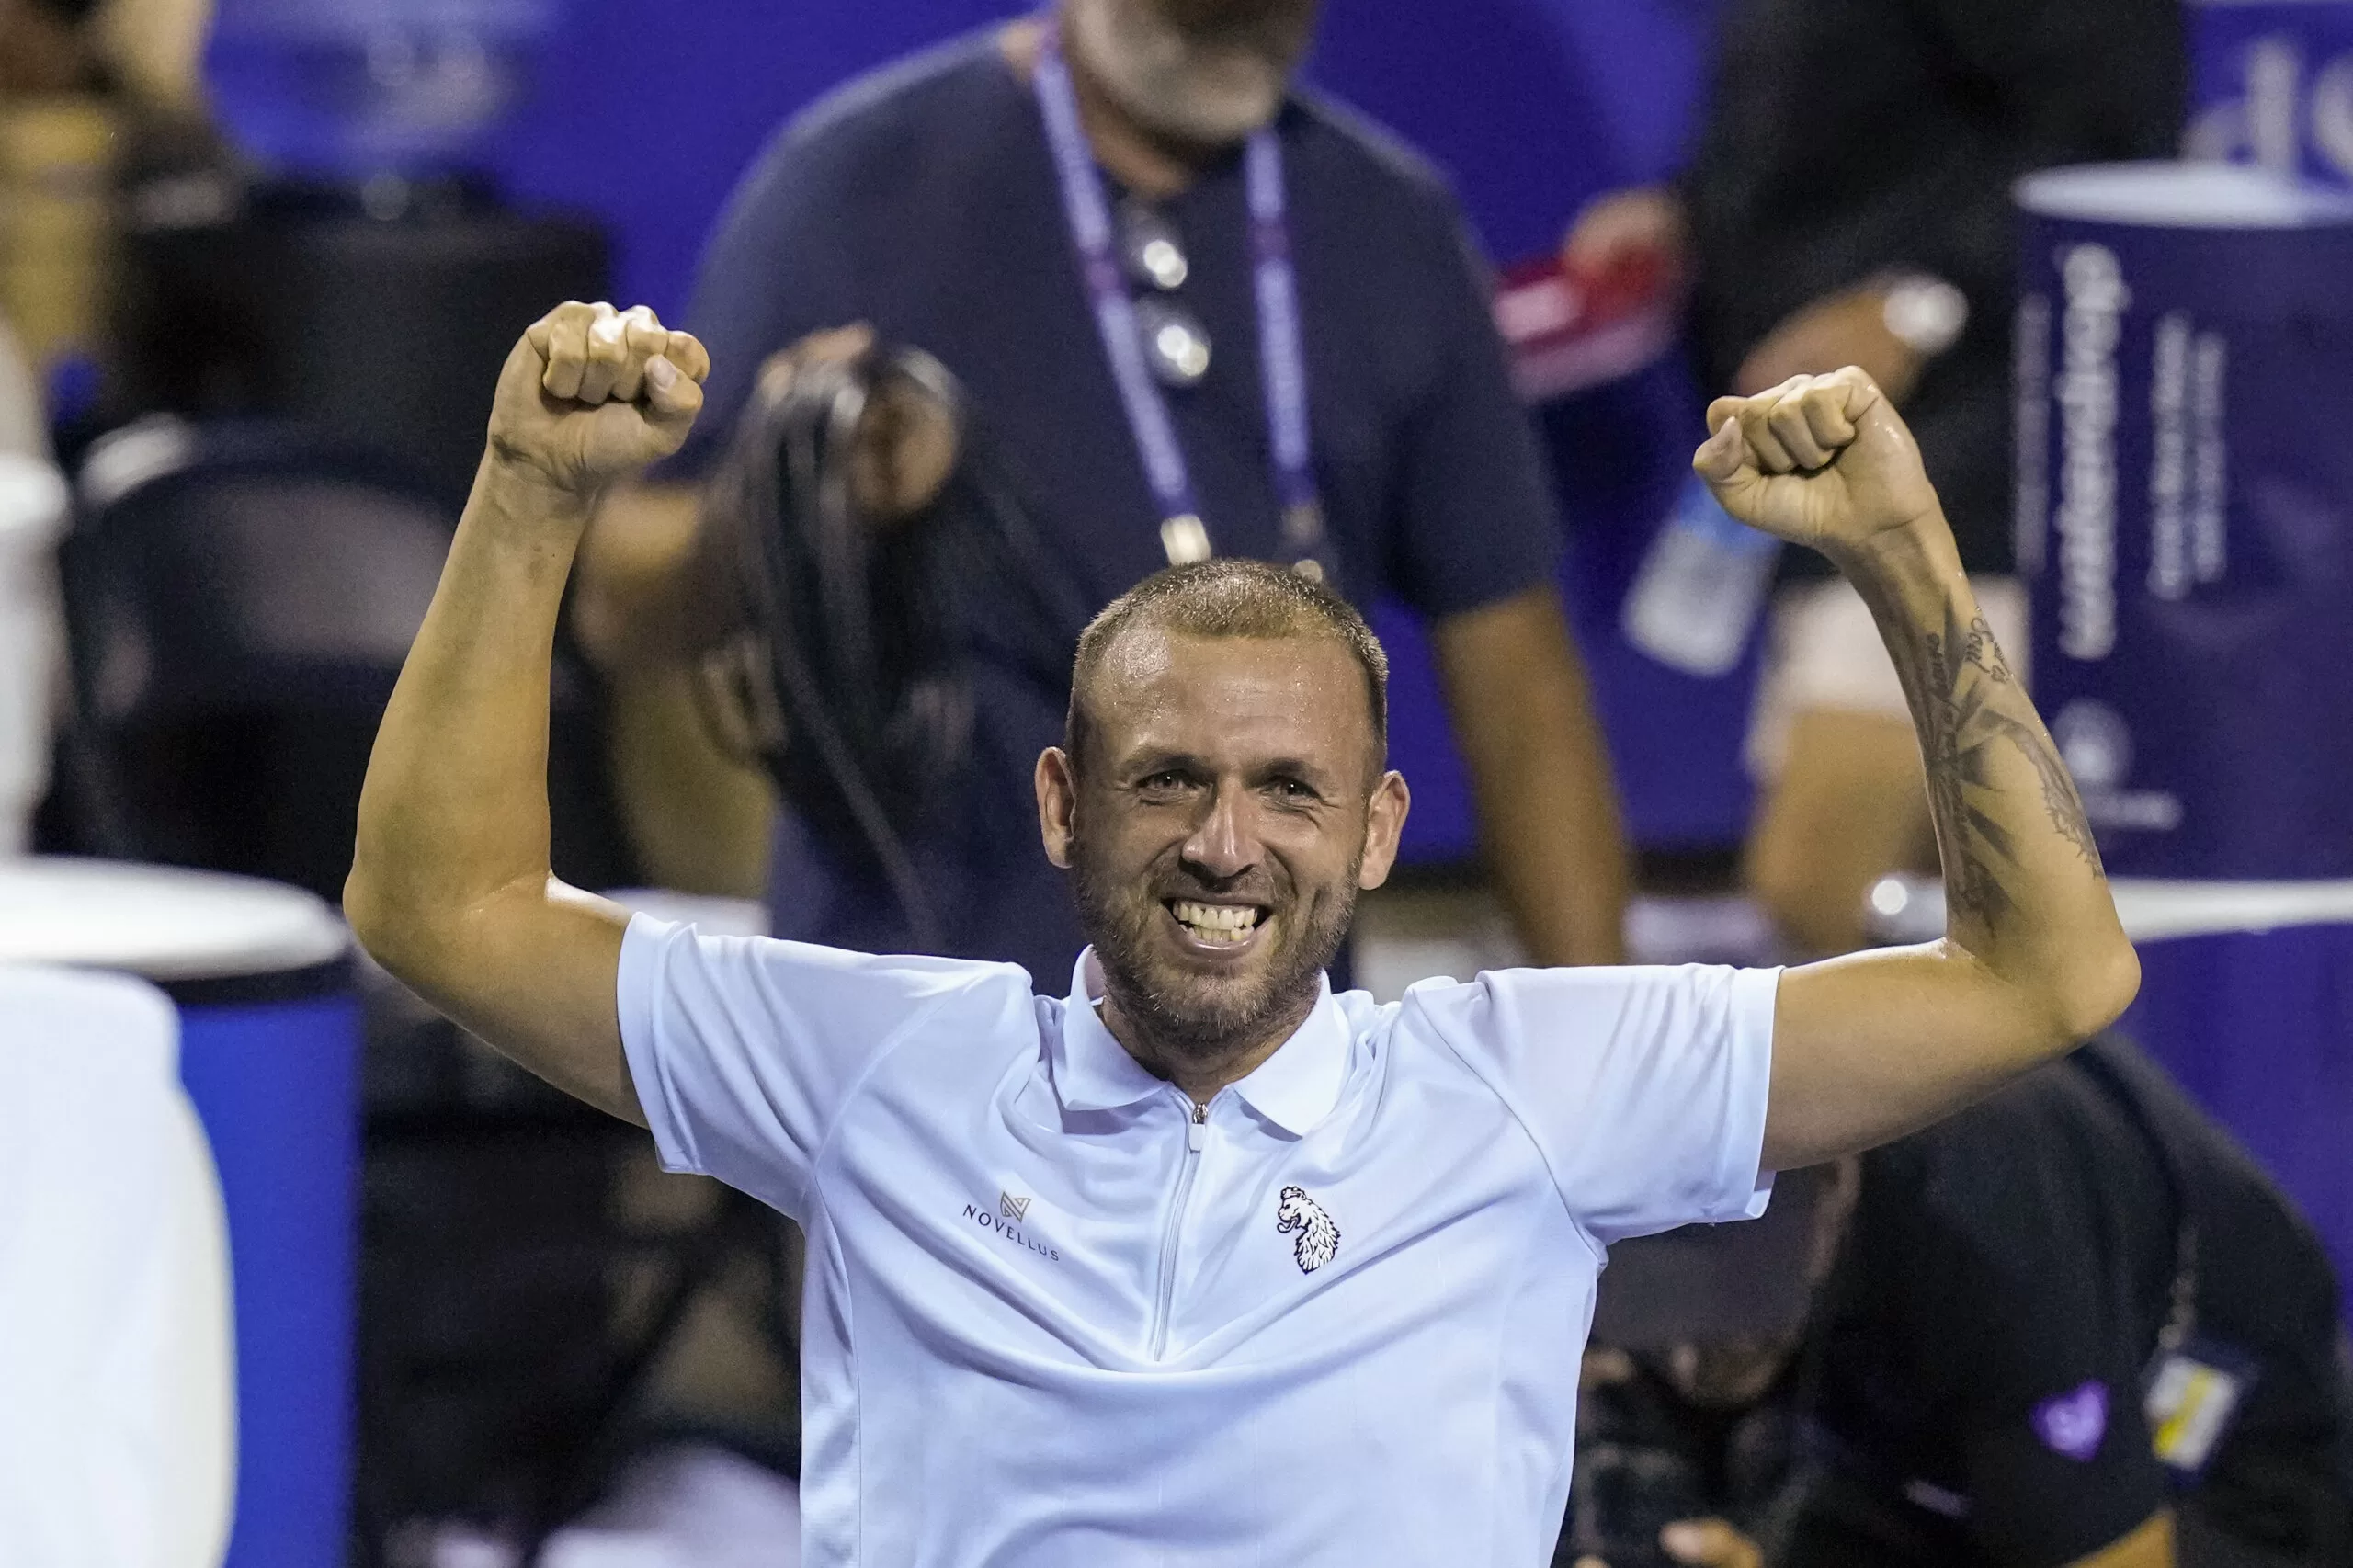 Dan Evans wins his second career ATP title by beating Tallon Griekspoor in Washington
